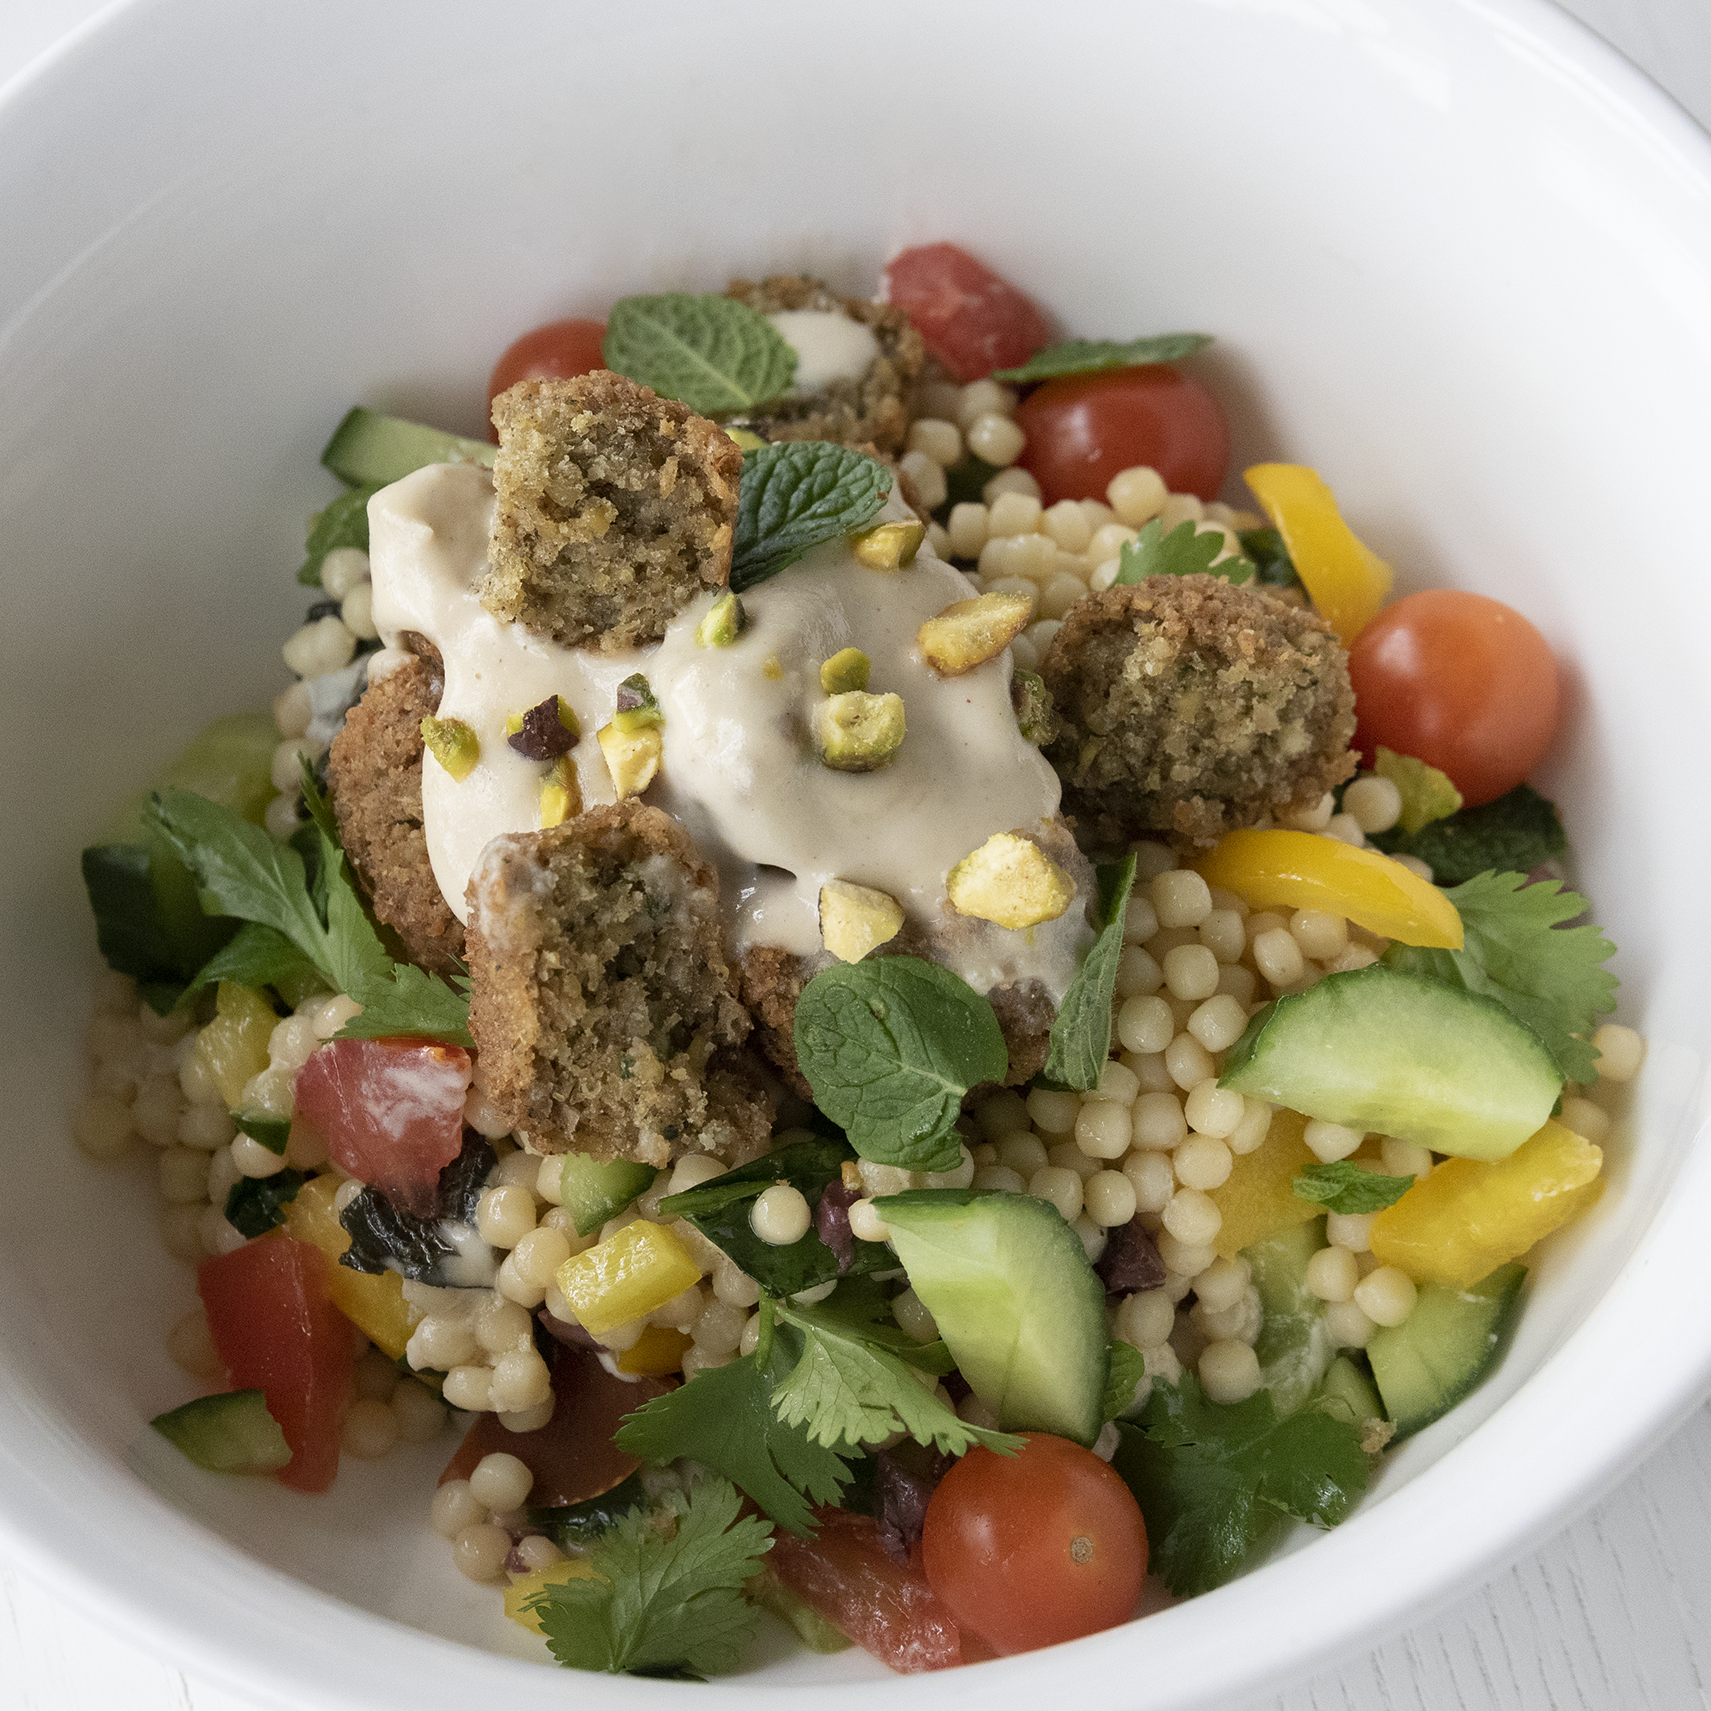 Easy and quick Falafel on a bed of steamed couscous which is loaded with herbs and crispy chunks of vegetables is unbeatable